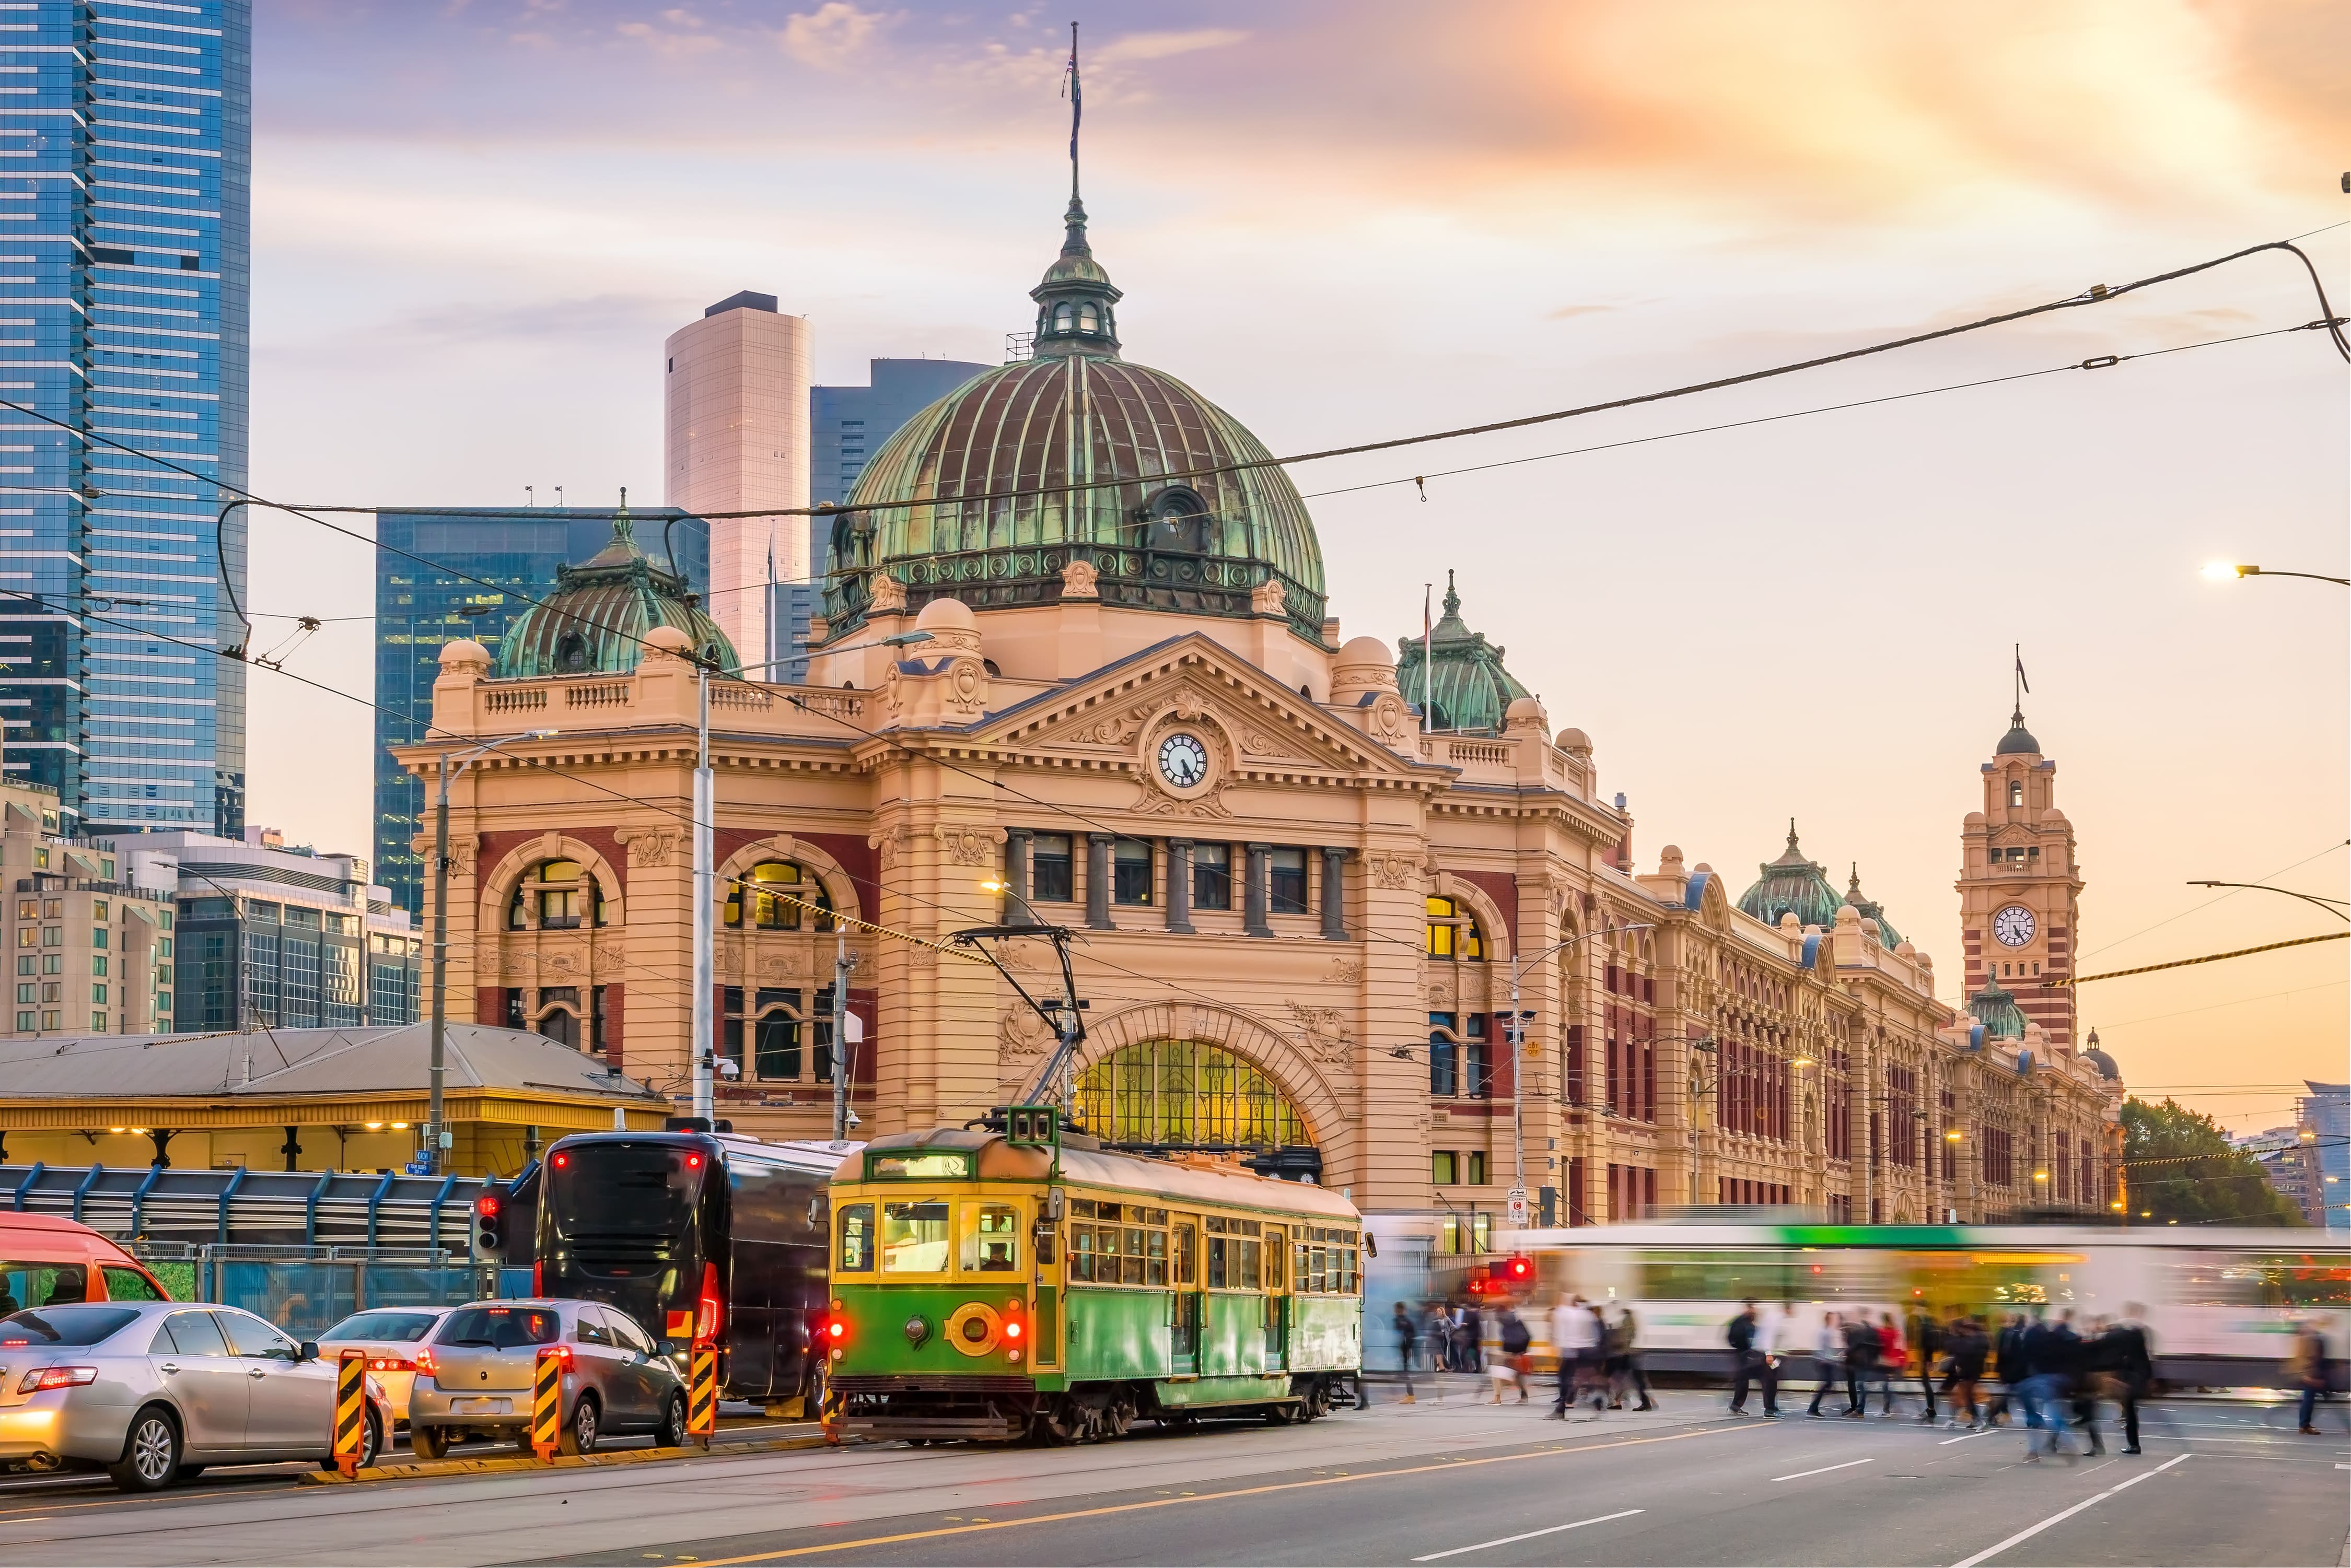 Flinders Street Station is just 1 of the many landmarks you'll see when you move from Adelaide to Melbourne with Richard mitchell removalists